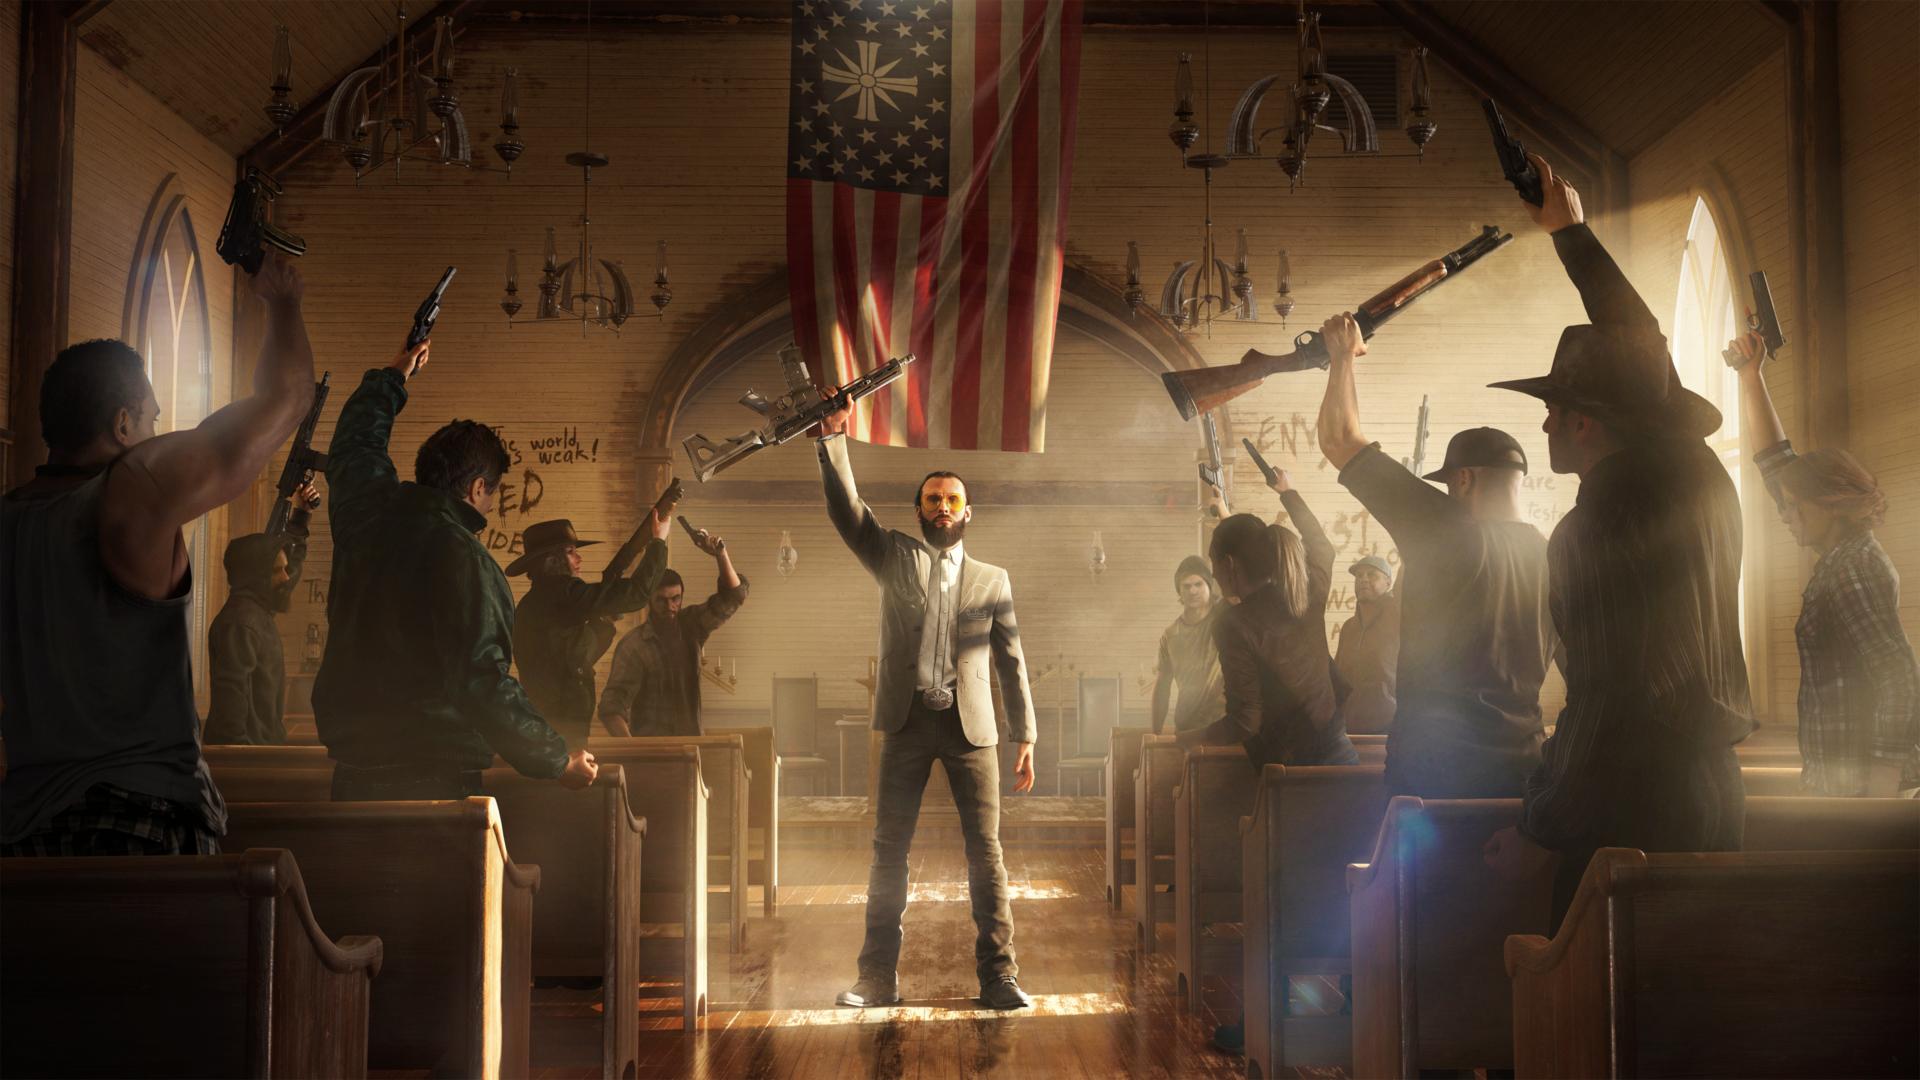 The cult leader in the church Wallpaper from Far Cry 5